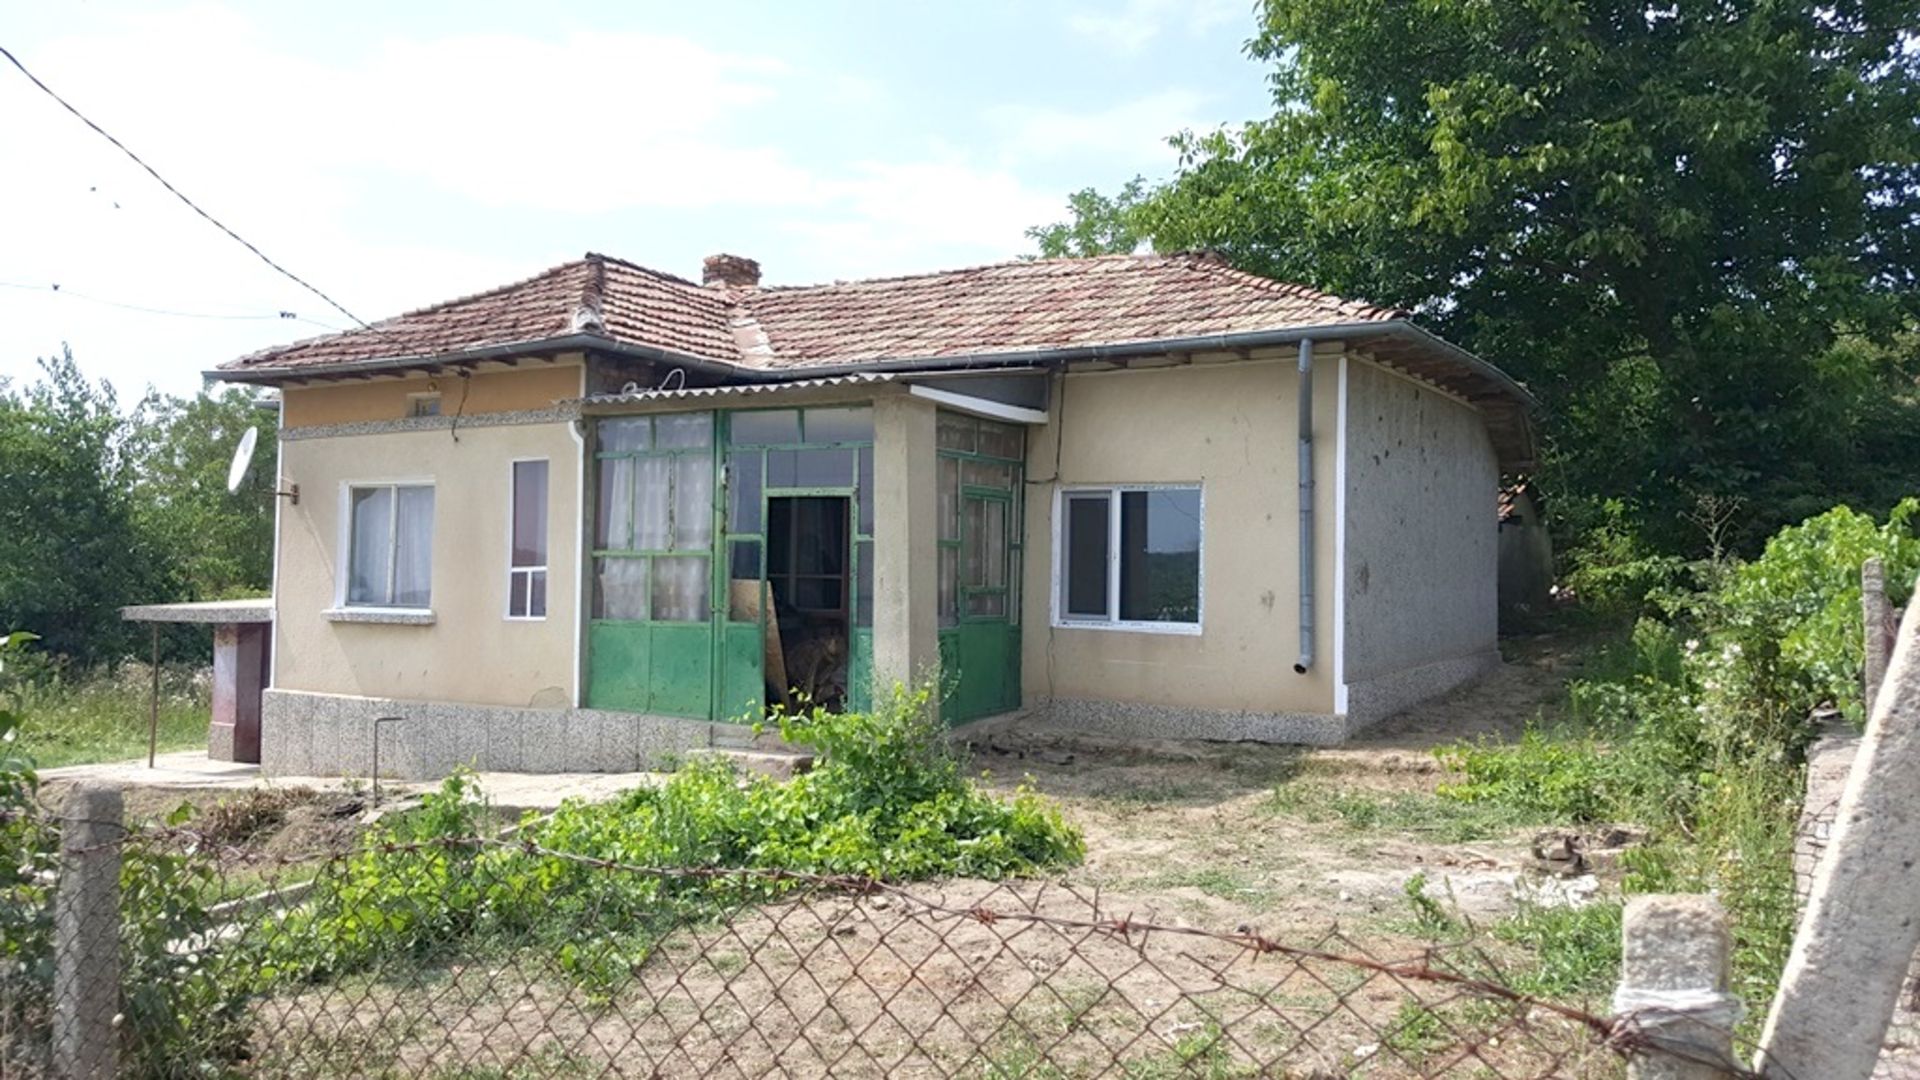 SUNFLOWER COTTAGE IN KRASEN, BULGARIA  - 30 miles from Beach! - Image 6 of 64